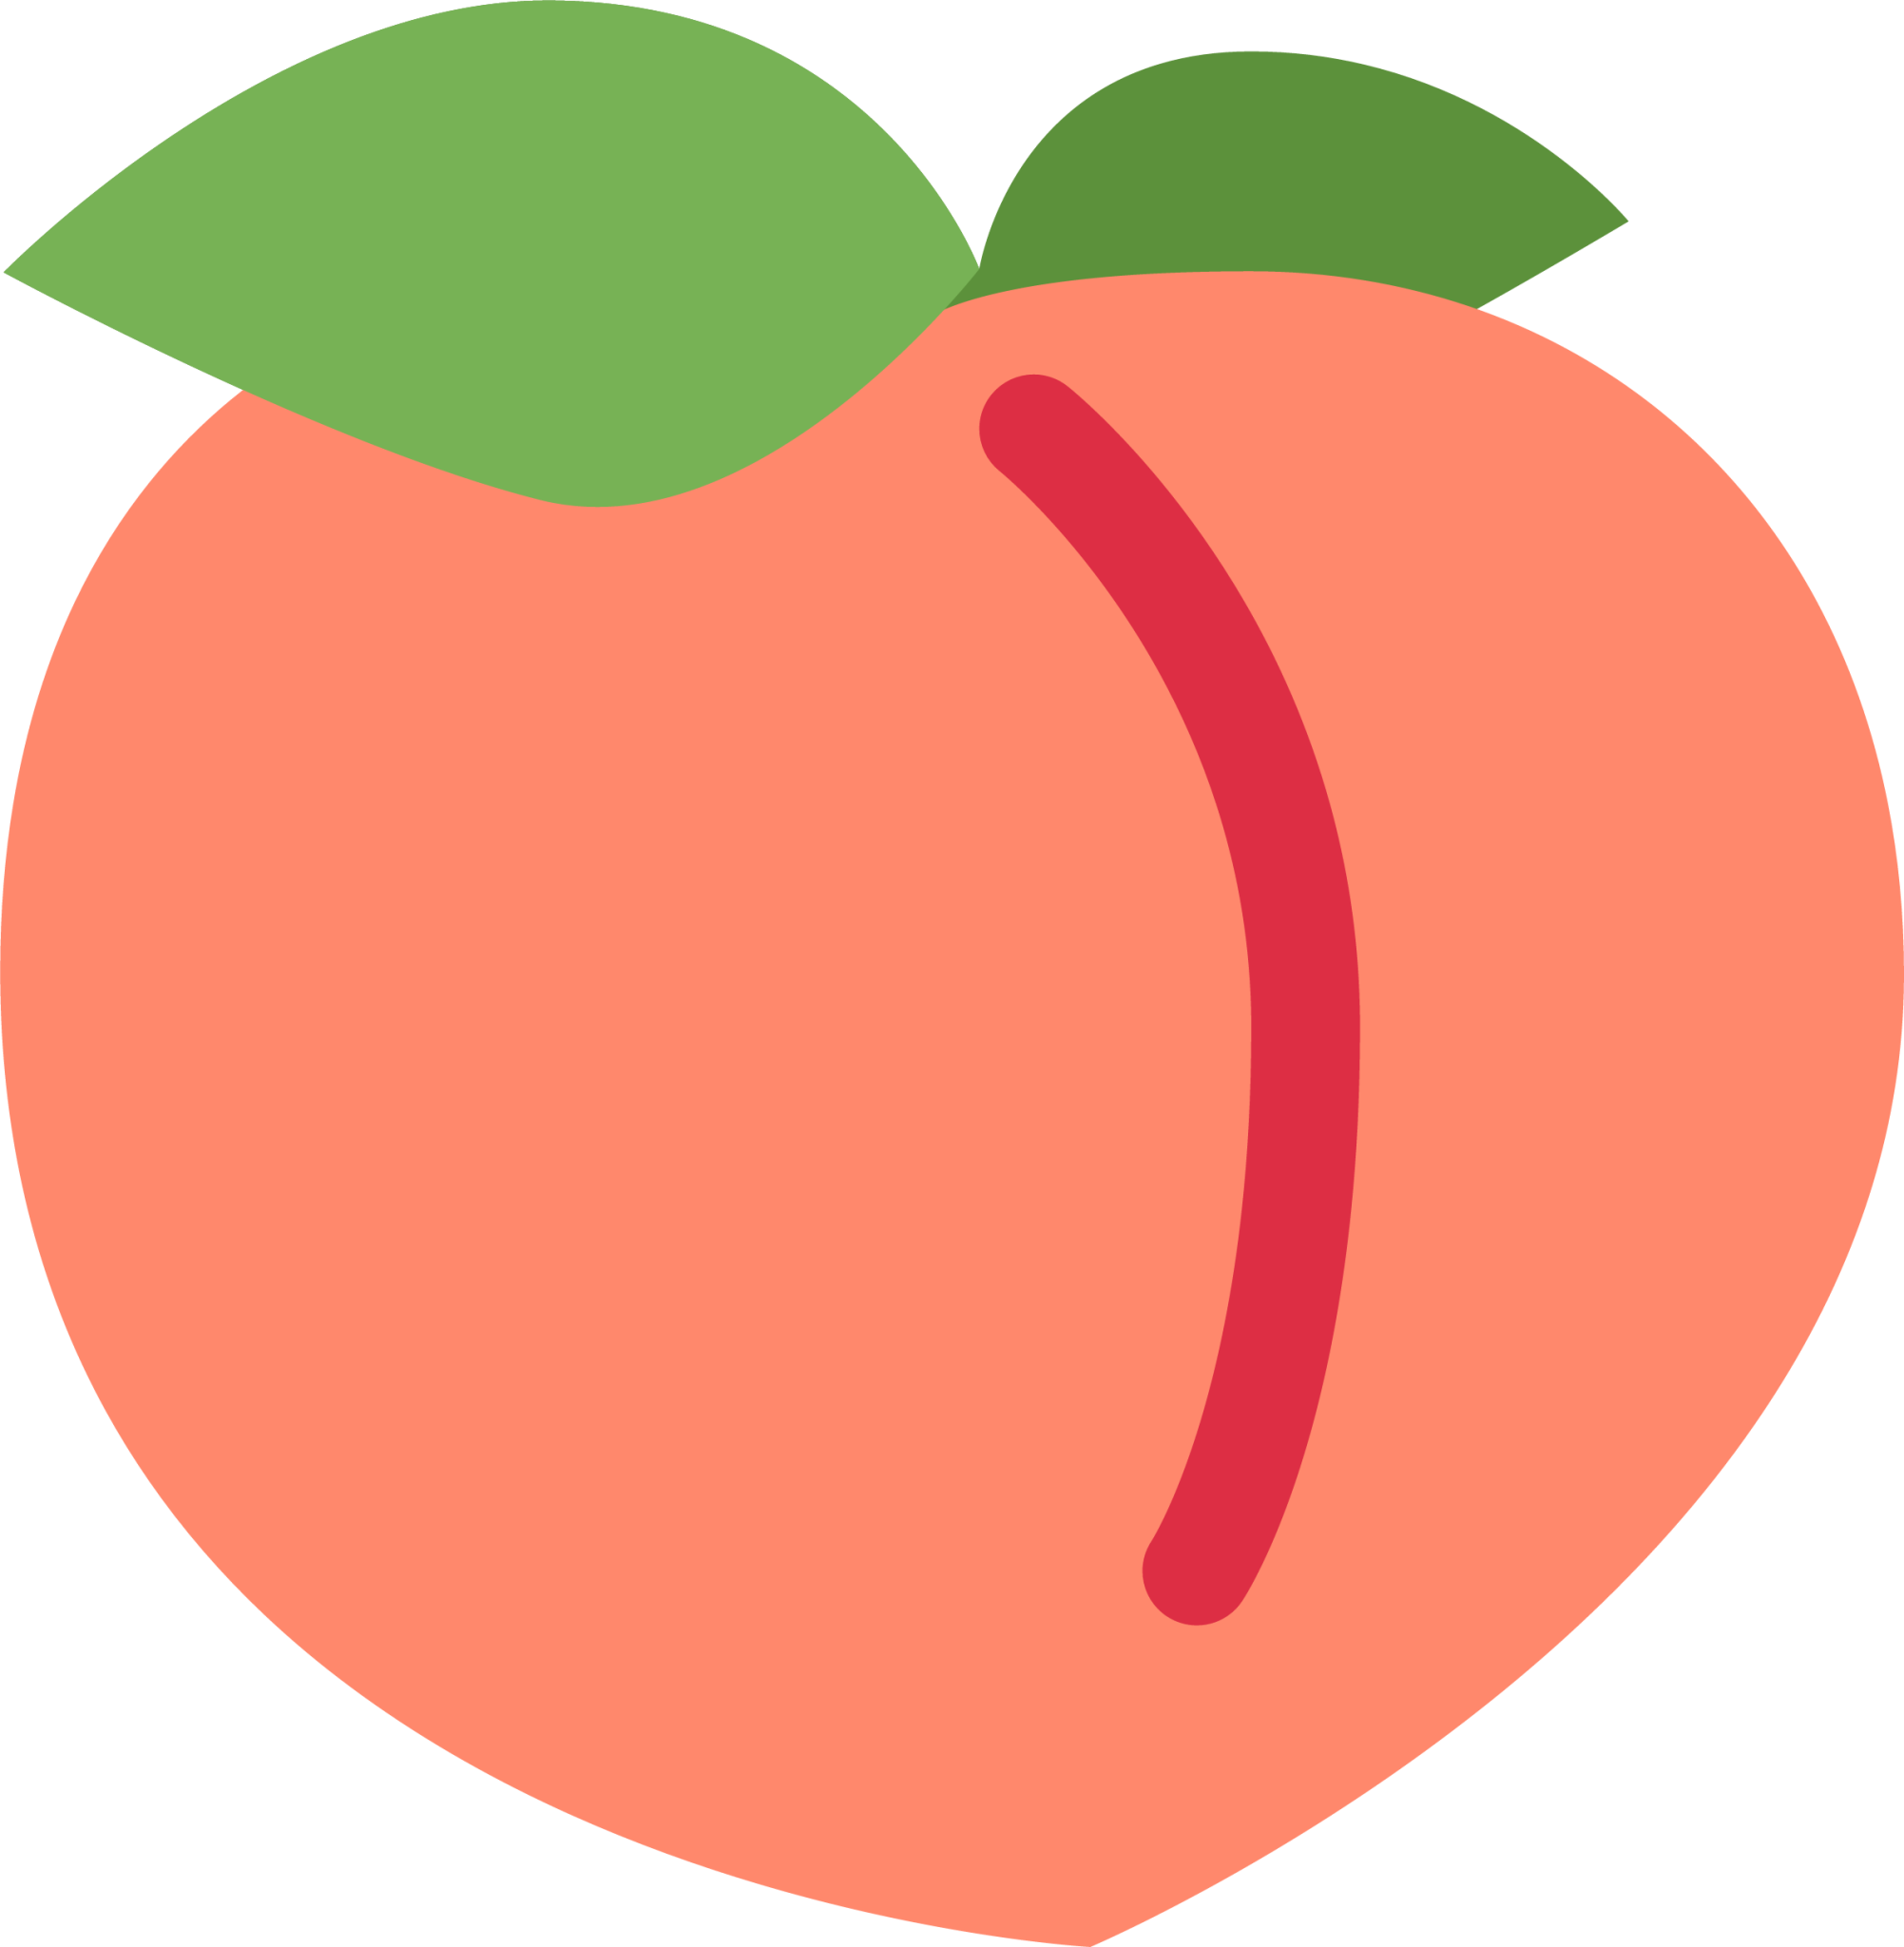 red apple Emoji - Download for free – Iconduck